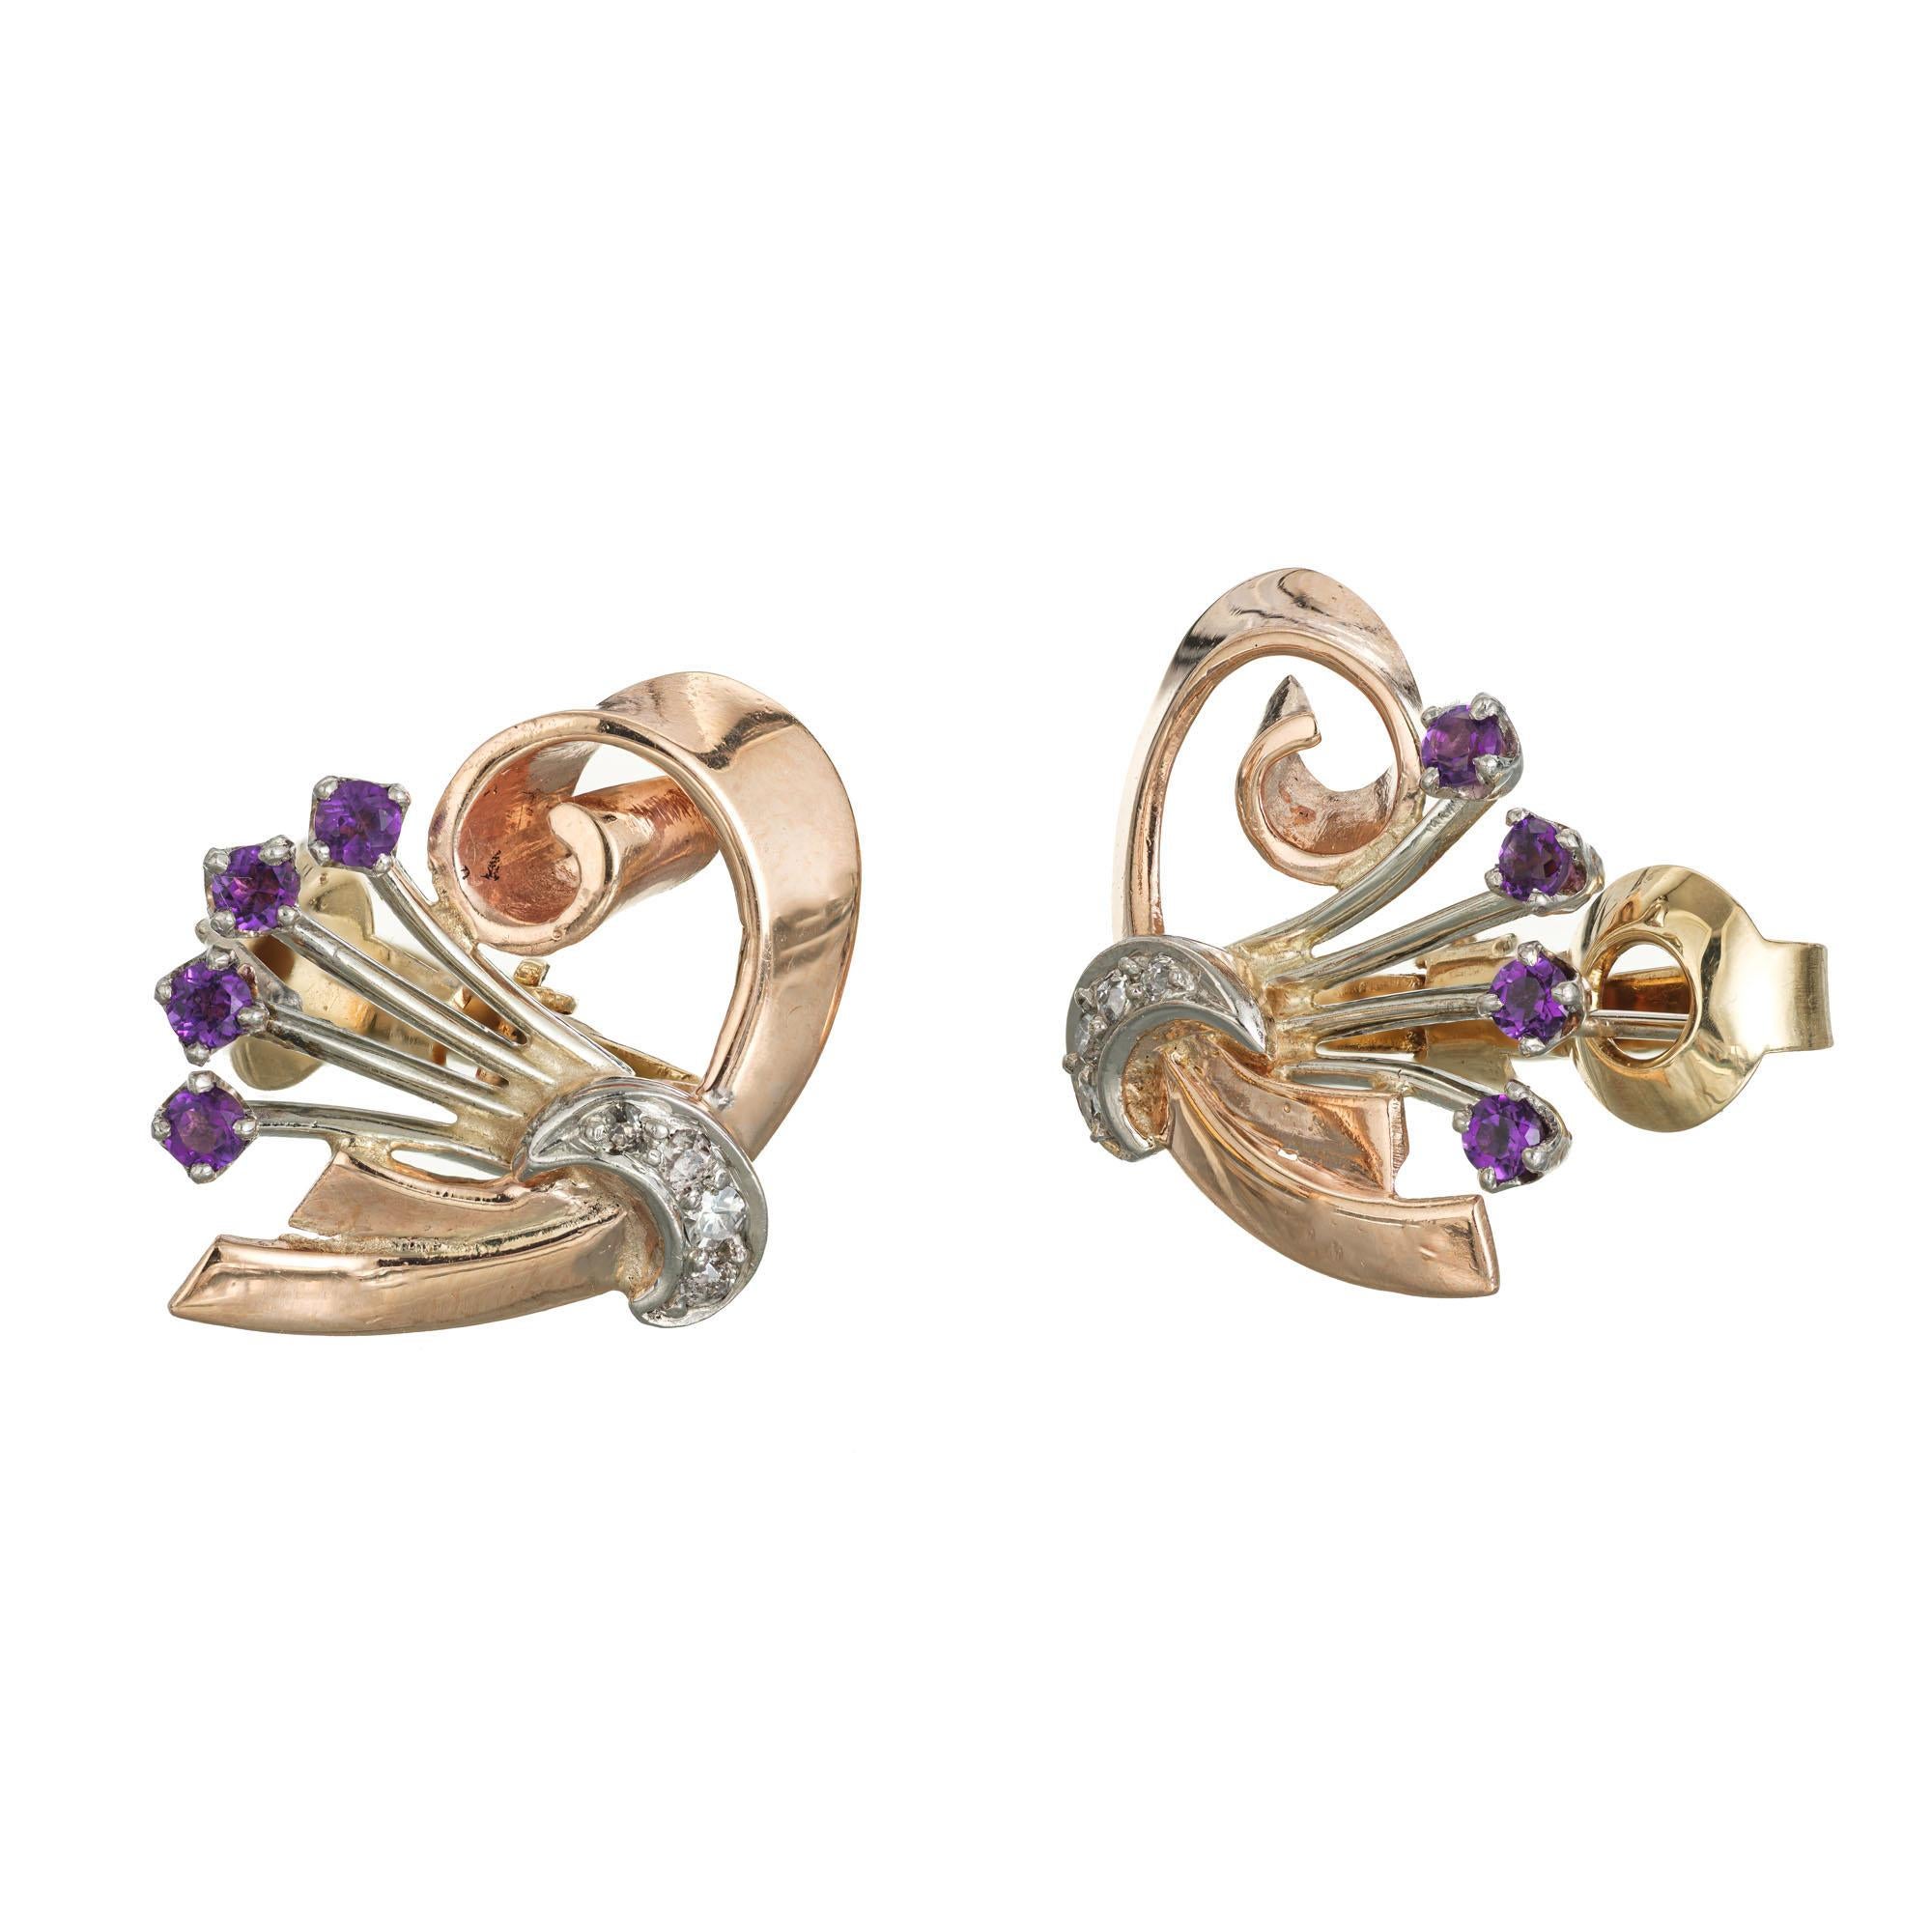 1940's rose and white gold Amethyst diamond clip post earrings. 8 round Amethyst and 8 round diamonds set in 14k rose and white gold.    

8 round rose cut diamonds, approx. total weight .08cts, VS
8 round purple Amethyst, approx. total weight